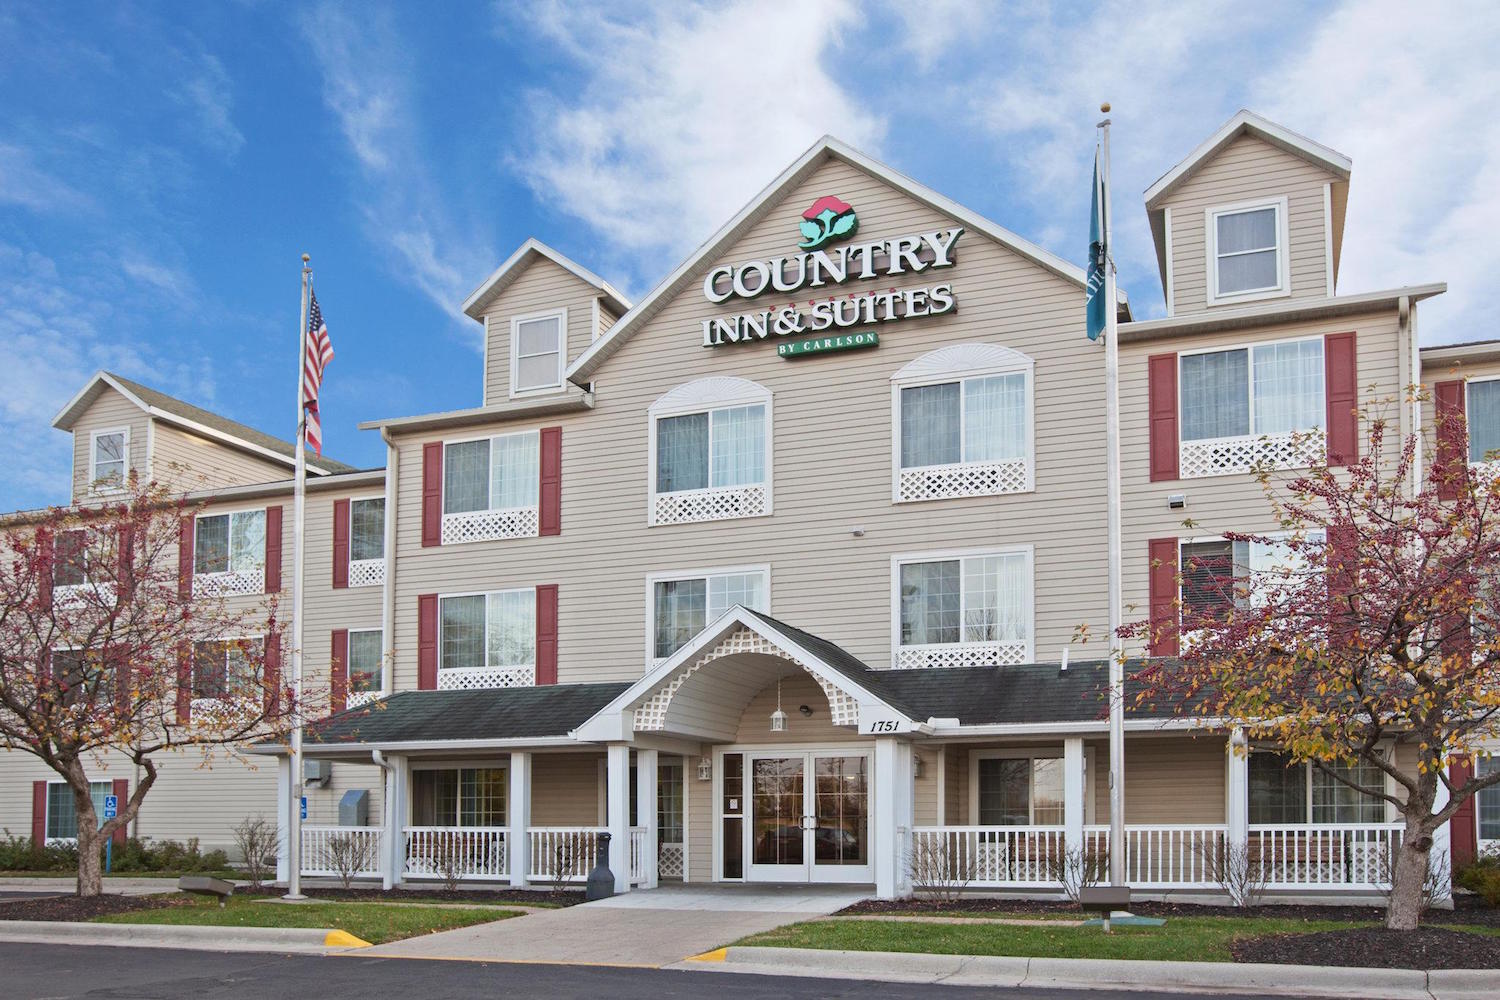 Photo of Country Inn & Suites by Radisson, Springfield, OH, Springfield, OH